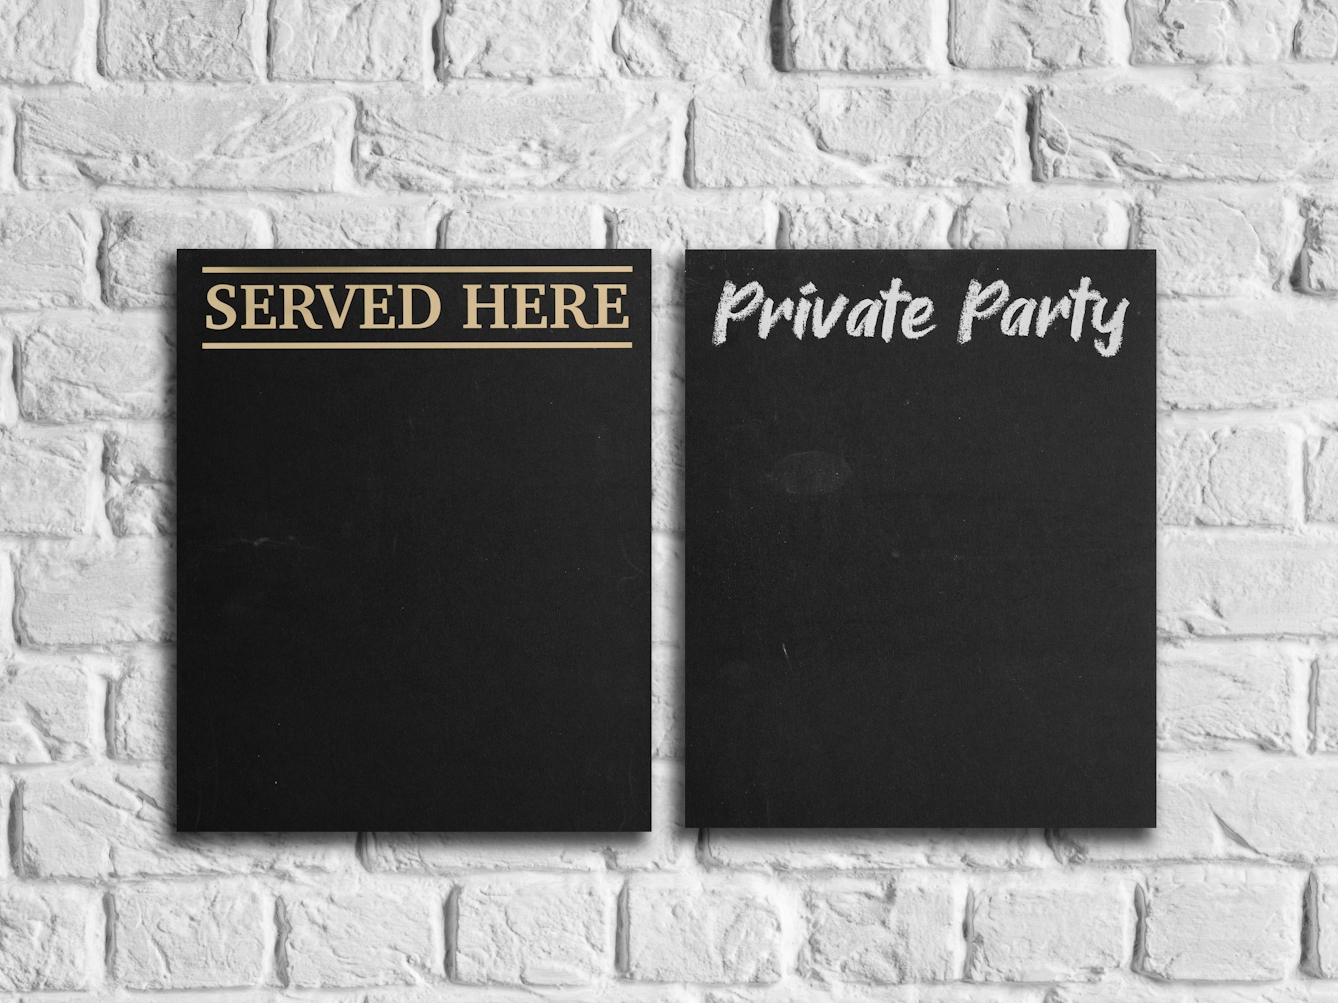 An image of two black chalkboard signs against a white brick wall. One sign has the words ‘Served Here’ printed on it, the other has ‘Private Party’ handwritten in chalk.